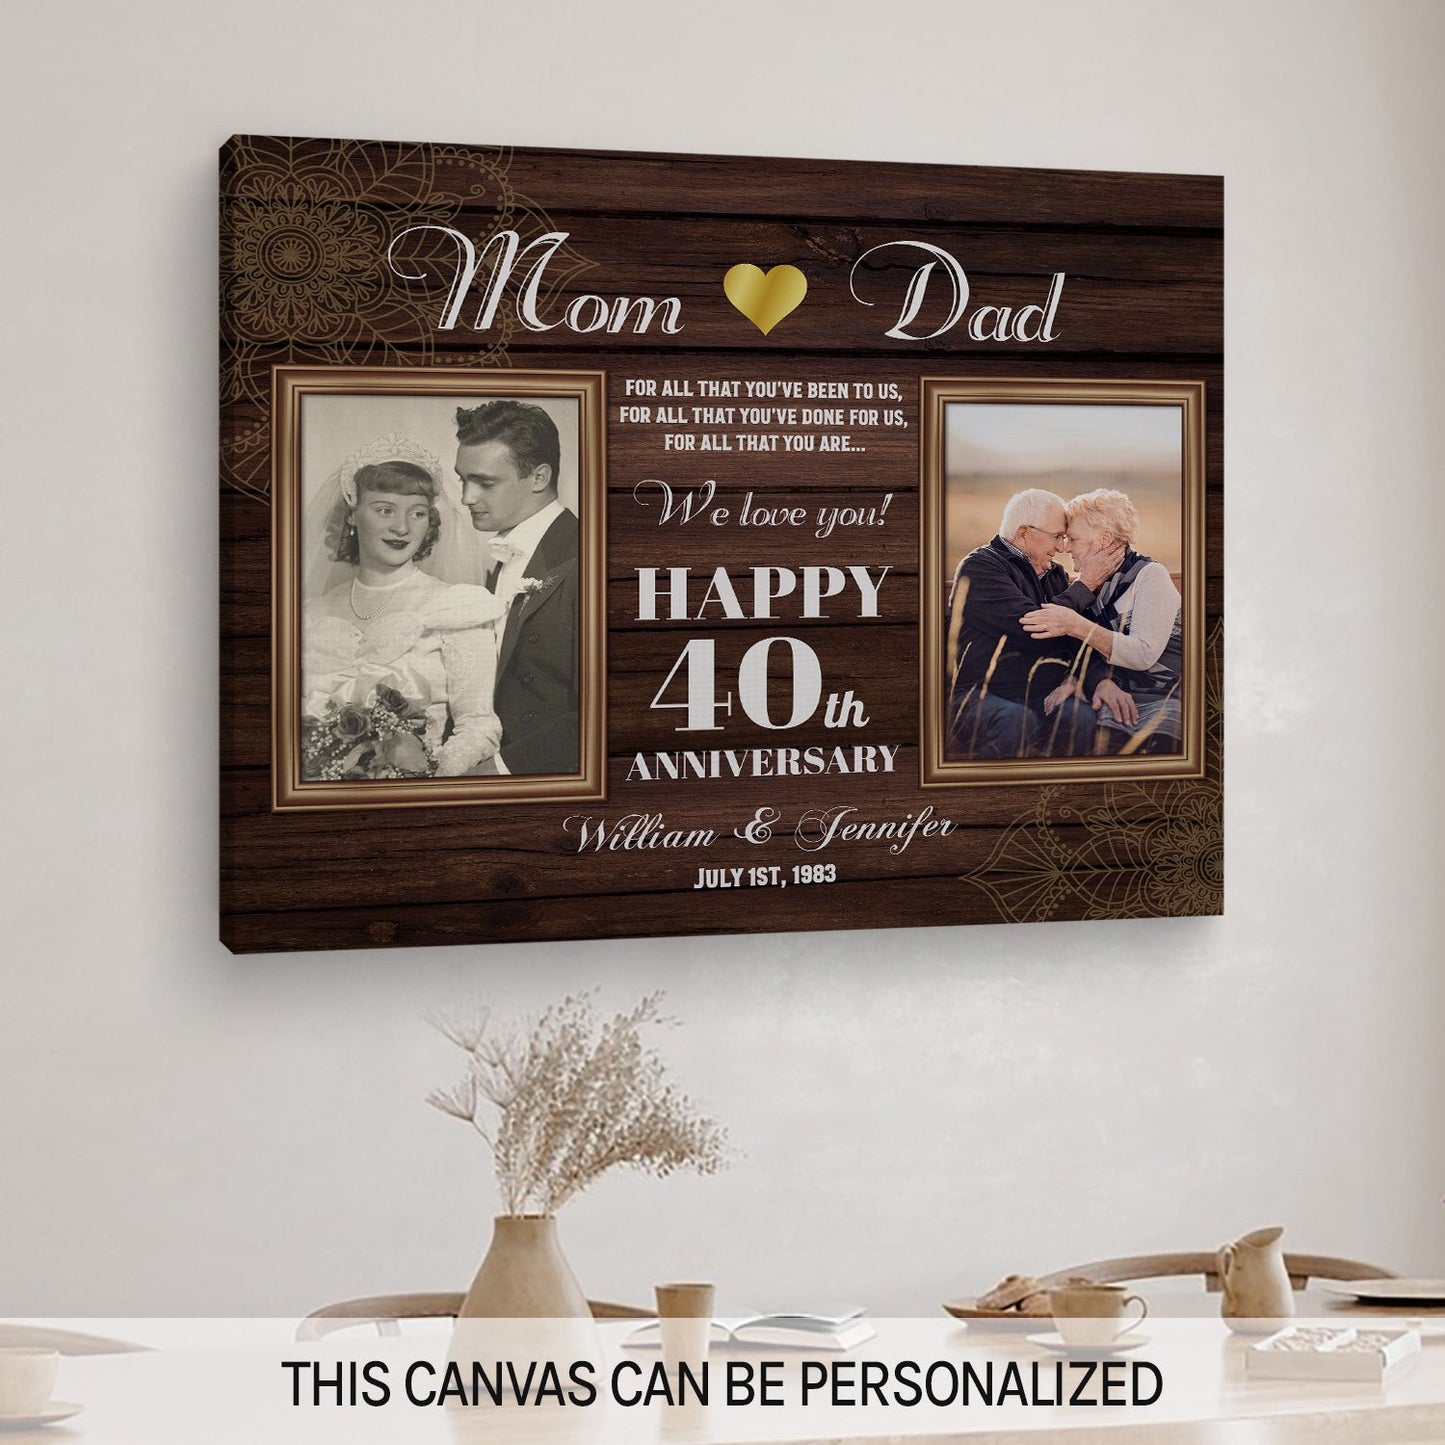 Happy 40th Wedding Anniversary - Personalized 40 Year Anniversary gift for Parents - Custom Canvas - MyMindfulGifts